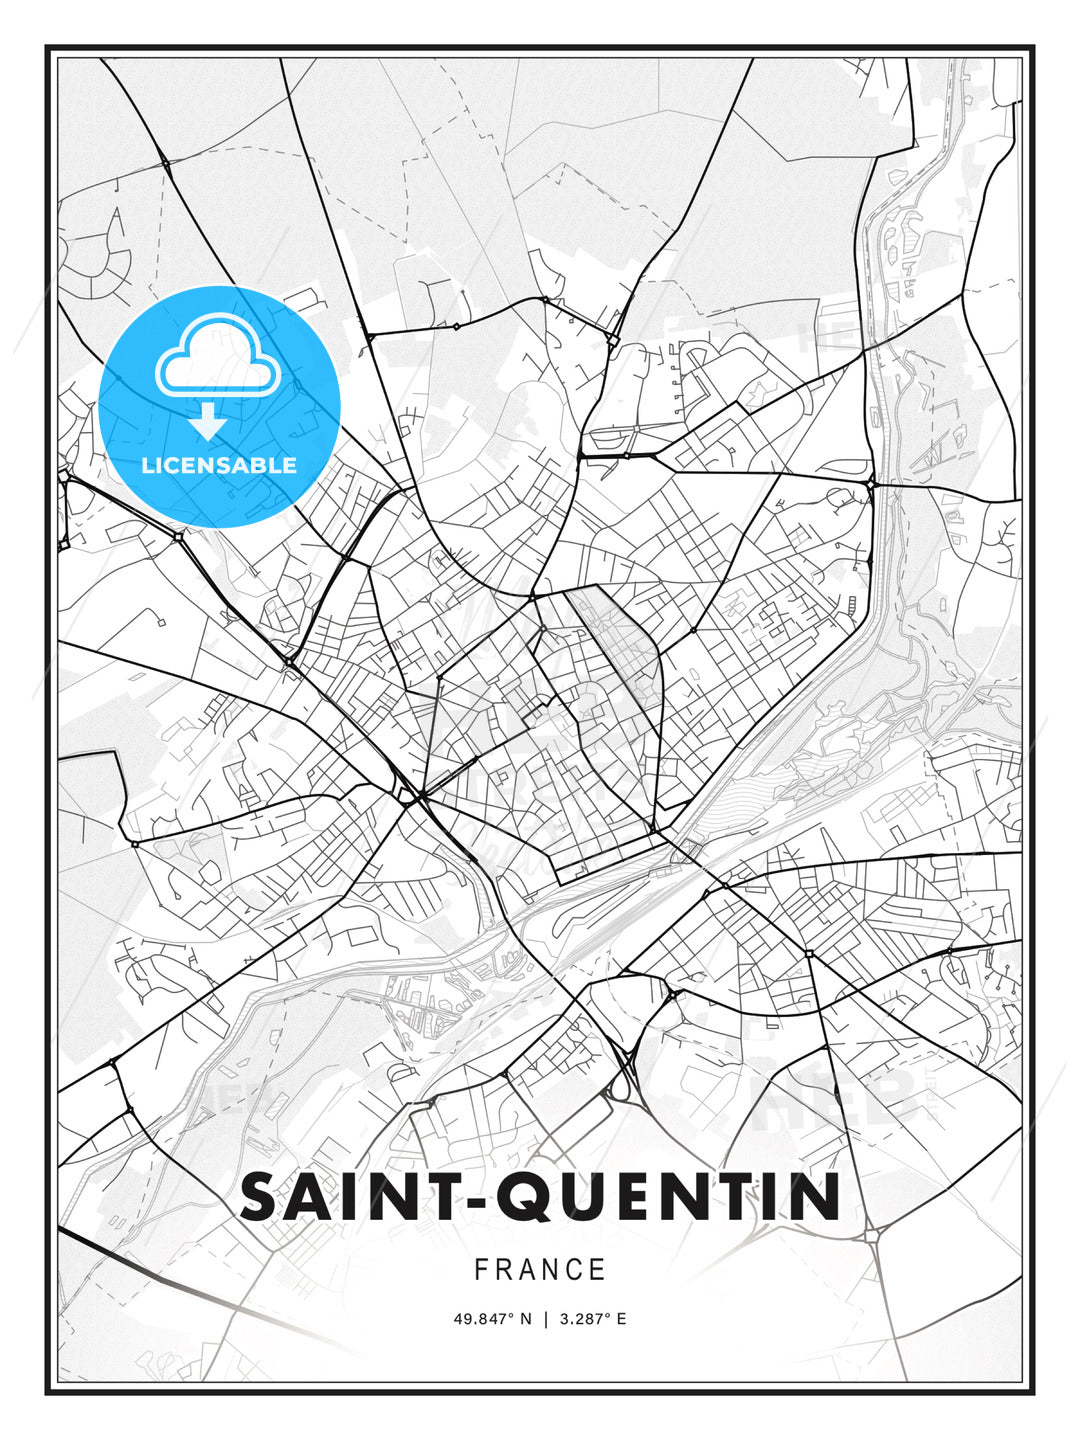 Saint-Quentin, France, Modern Print Template in Various Formats - HEBSTREITS Sketches